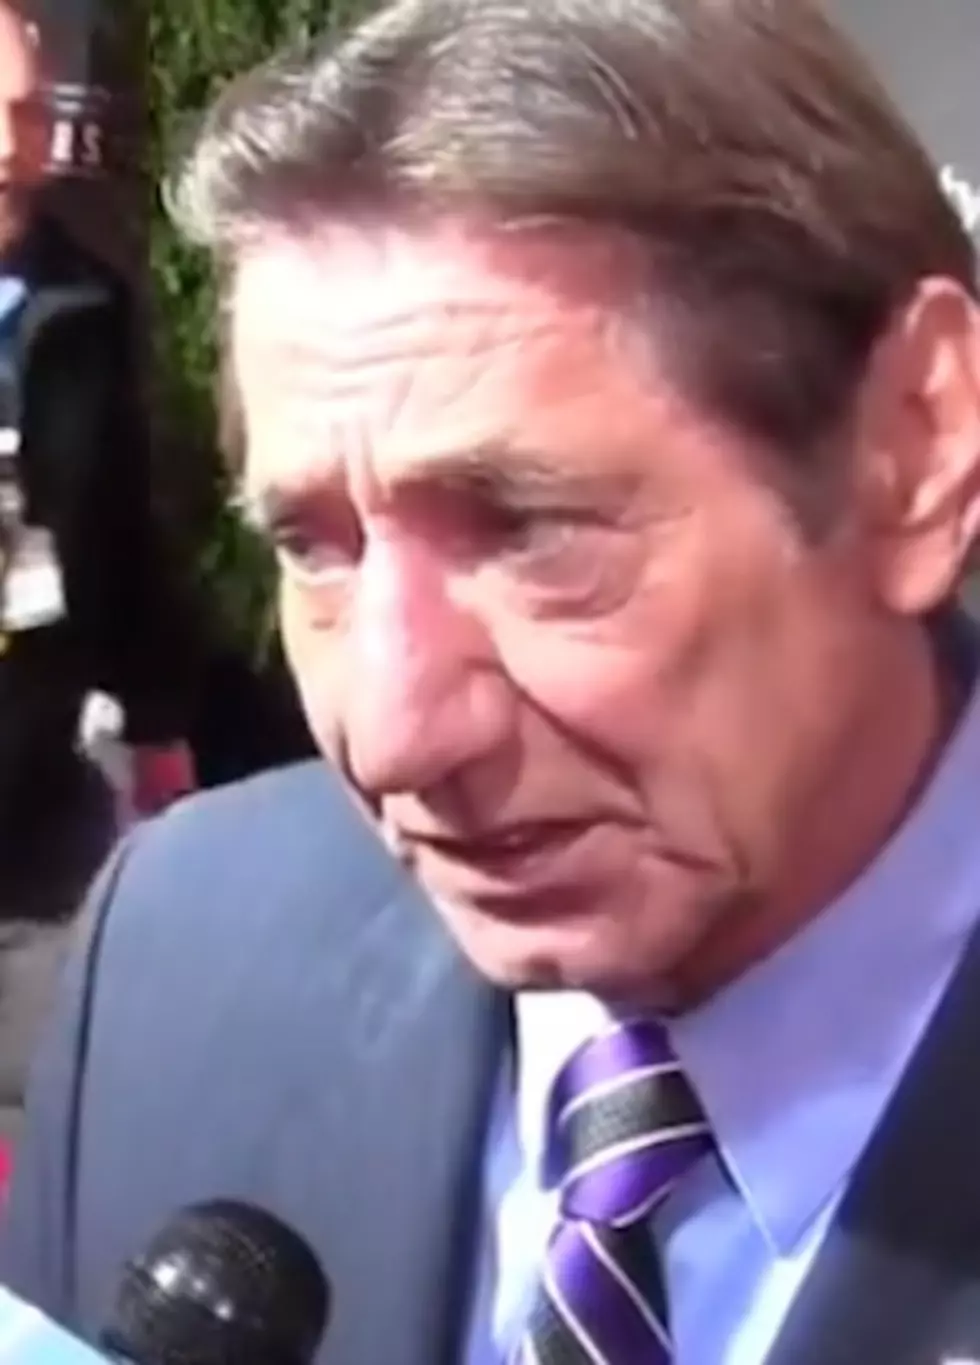 Joe Namath: &#8216;We All Need to Take Better Care of Ourselves&#8217; &#8212; 2013 NFL Honors